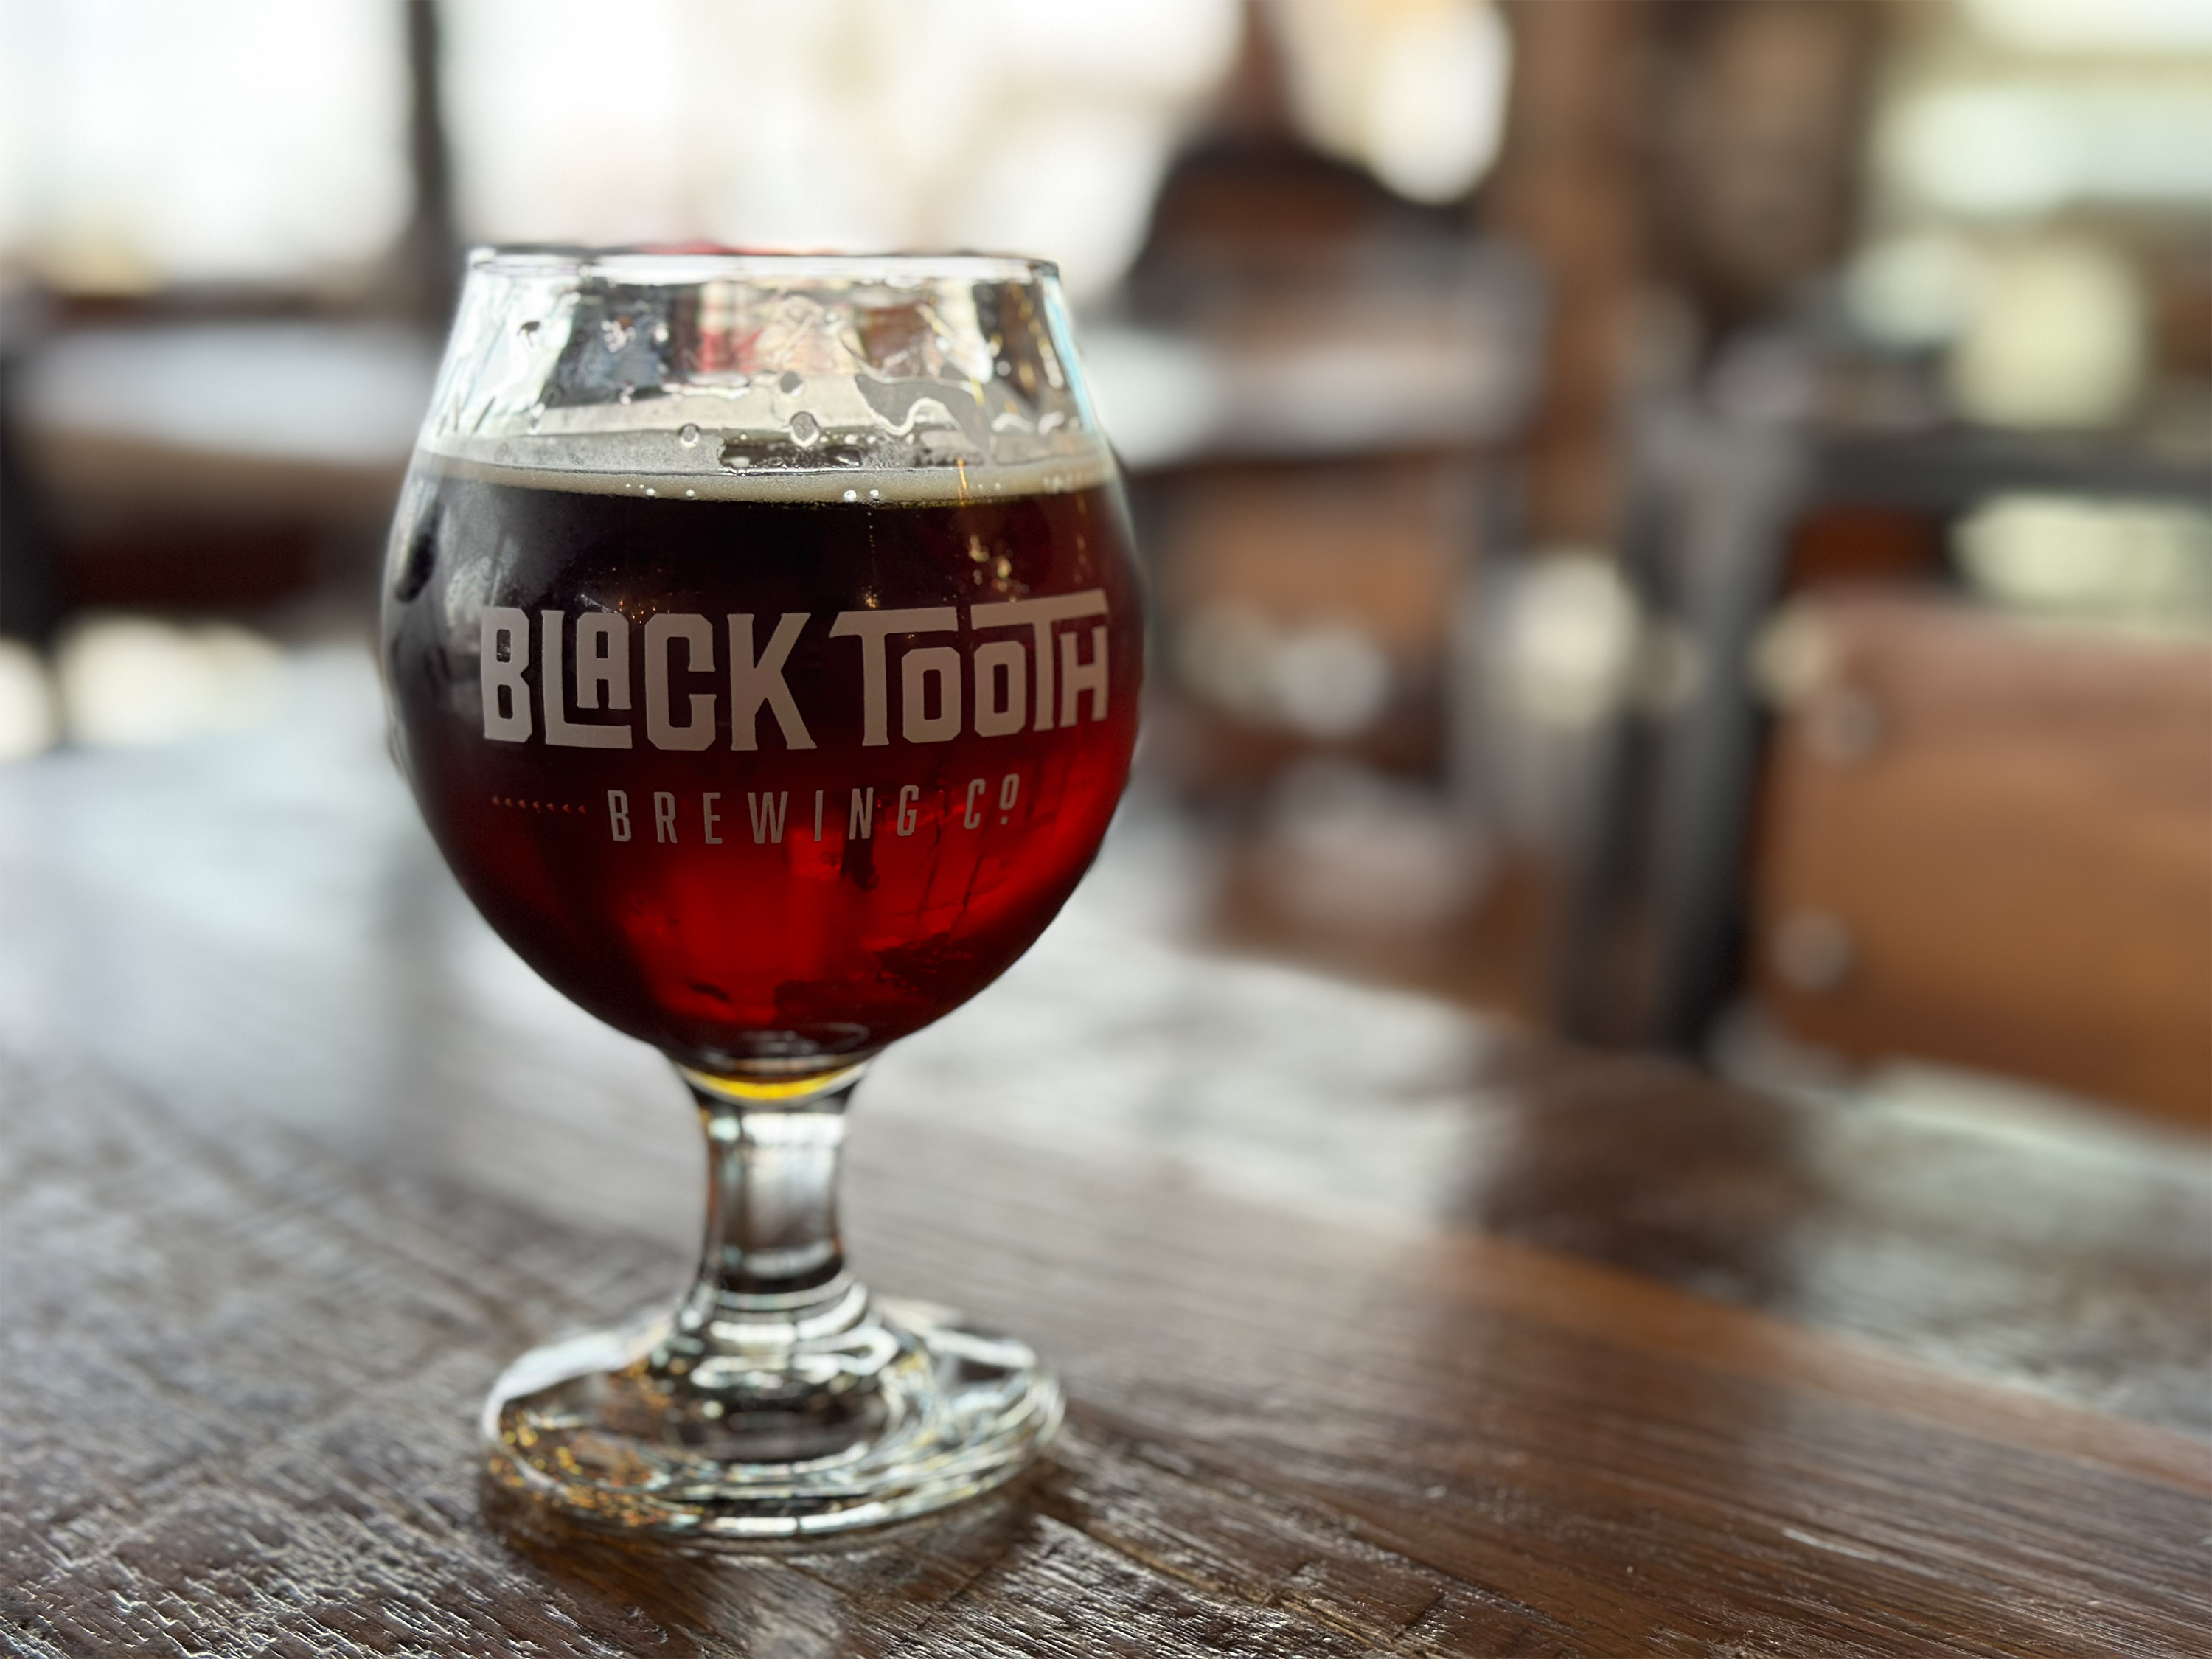 Black Tooth’s 1314 Anniversary Ale, a barrel-aged English Strong AlePhoto Credit: Amber Leberman